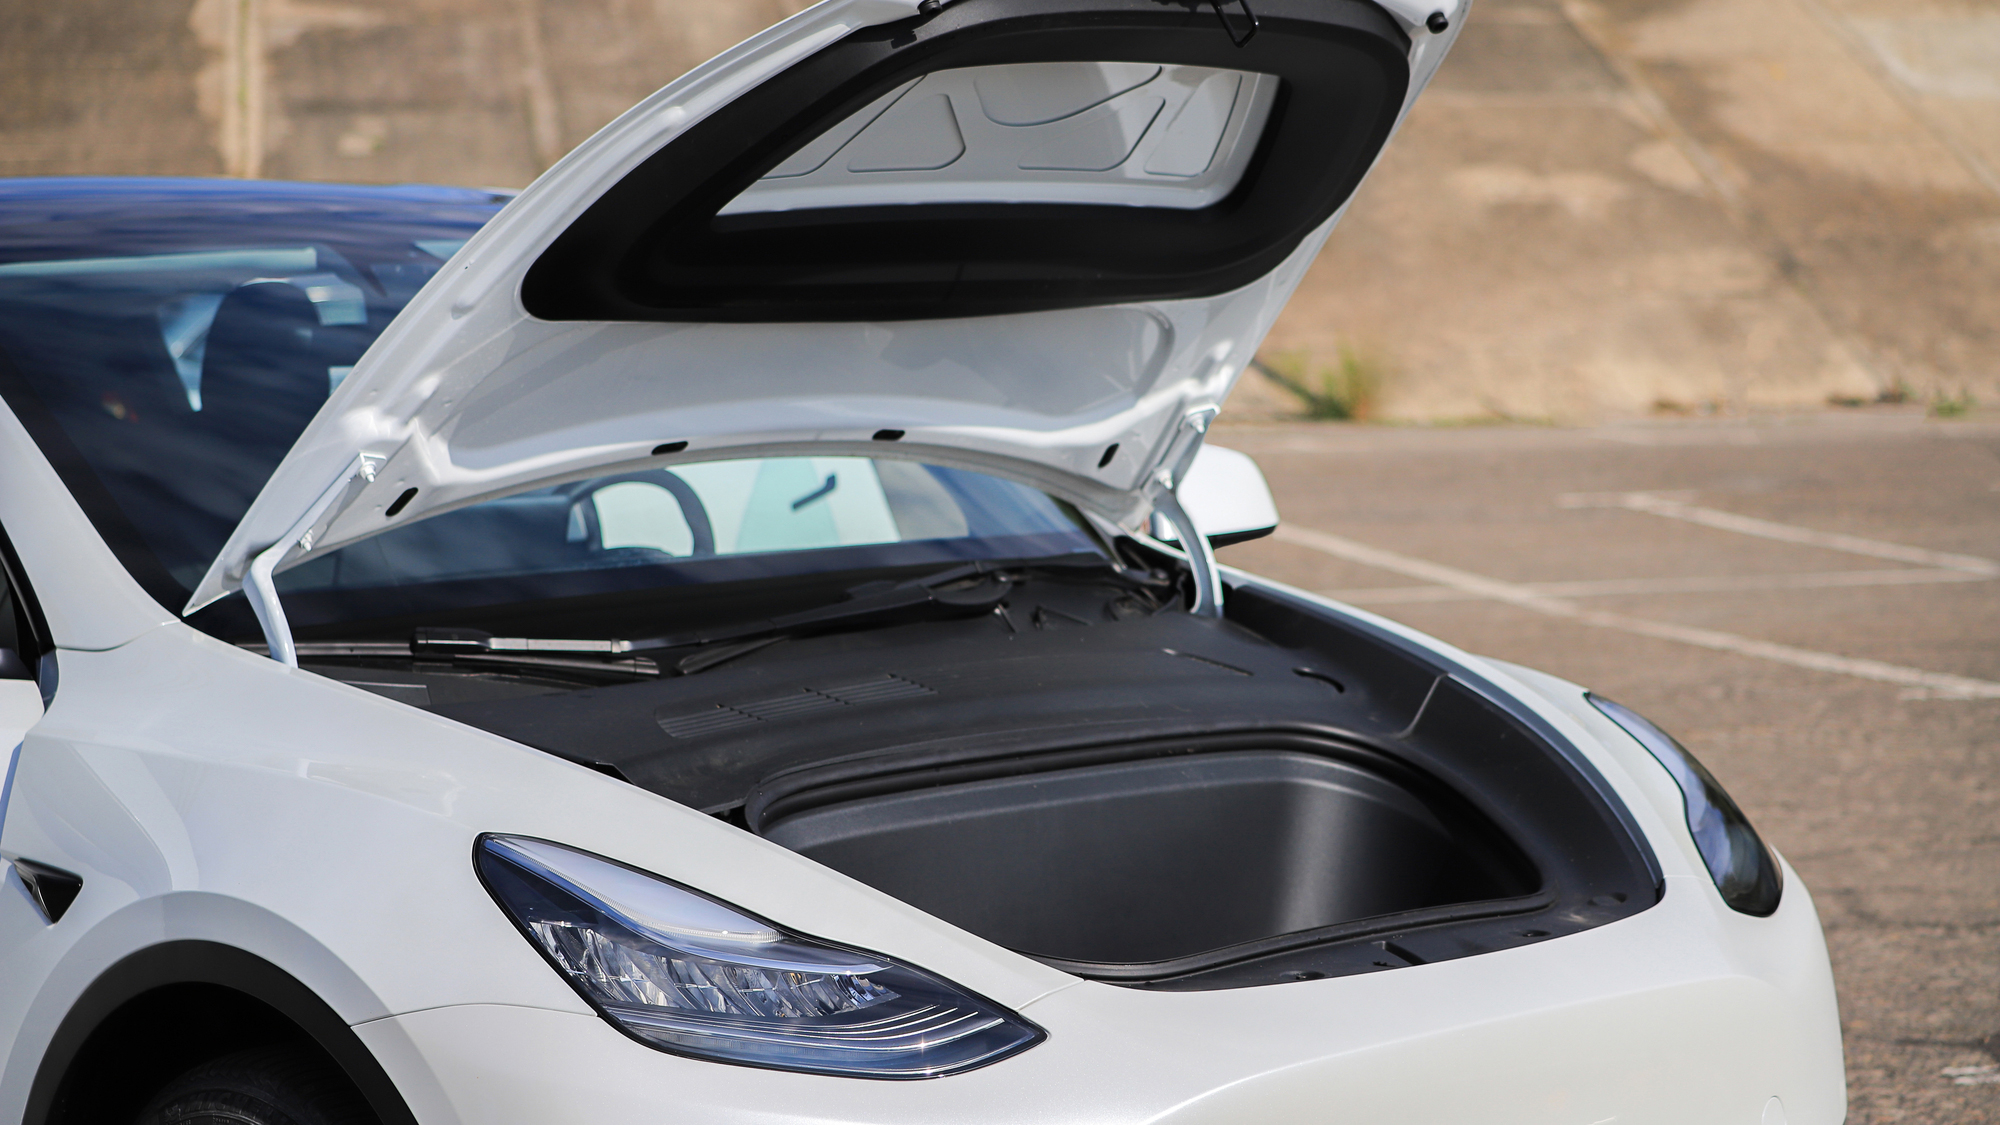 Tesla reportedly wants to ‘gigacast’ a car’s underbody in just one piece